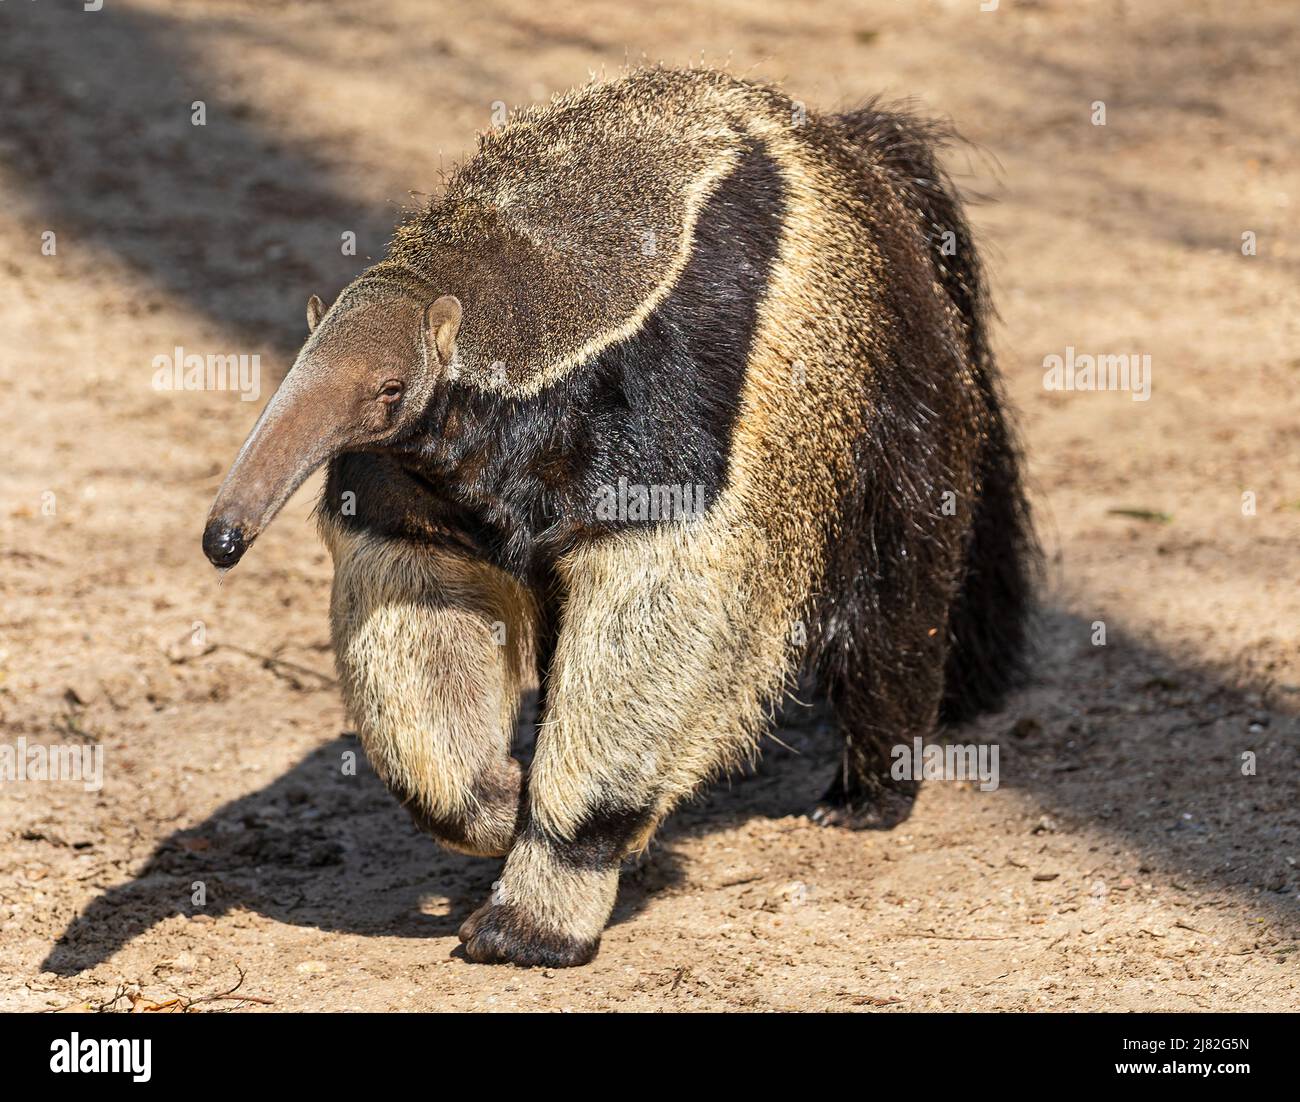 Frontal view of a Giant anteater (Myrmecophaga tridactyla) Stock Photo